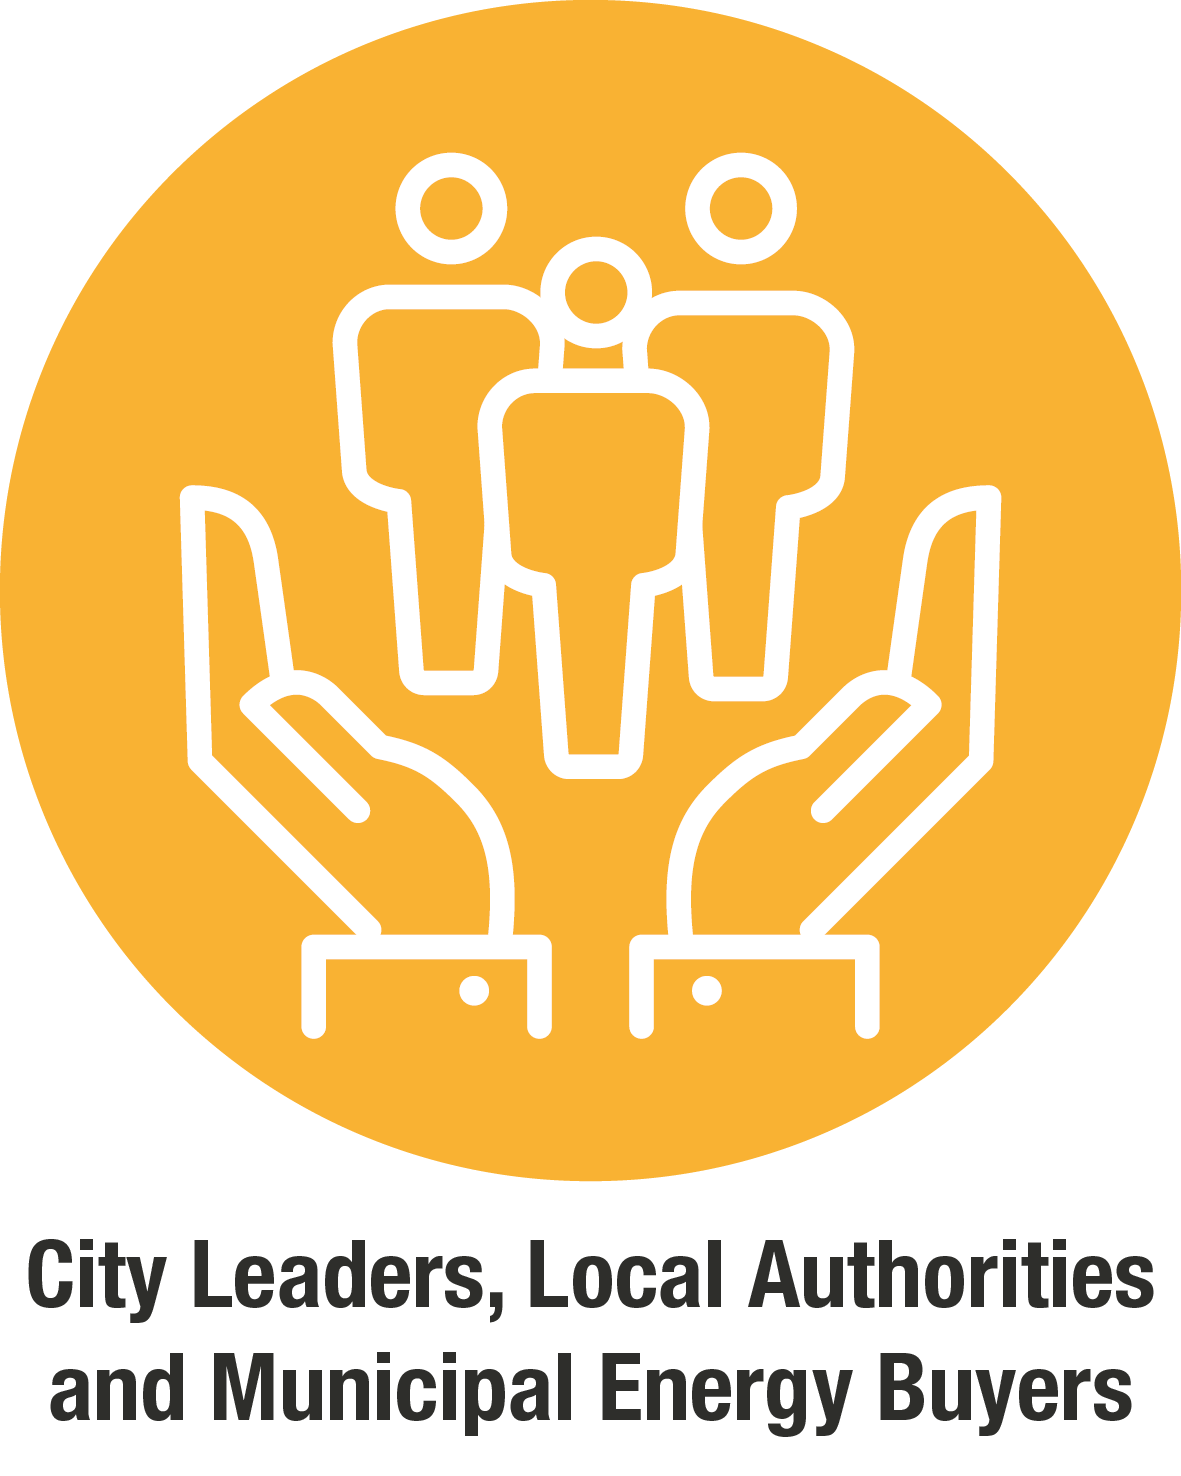 City Leaders, Local Authorities and Municipal Energy Buyers